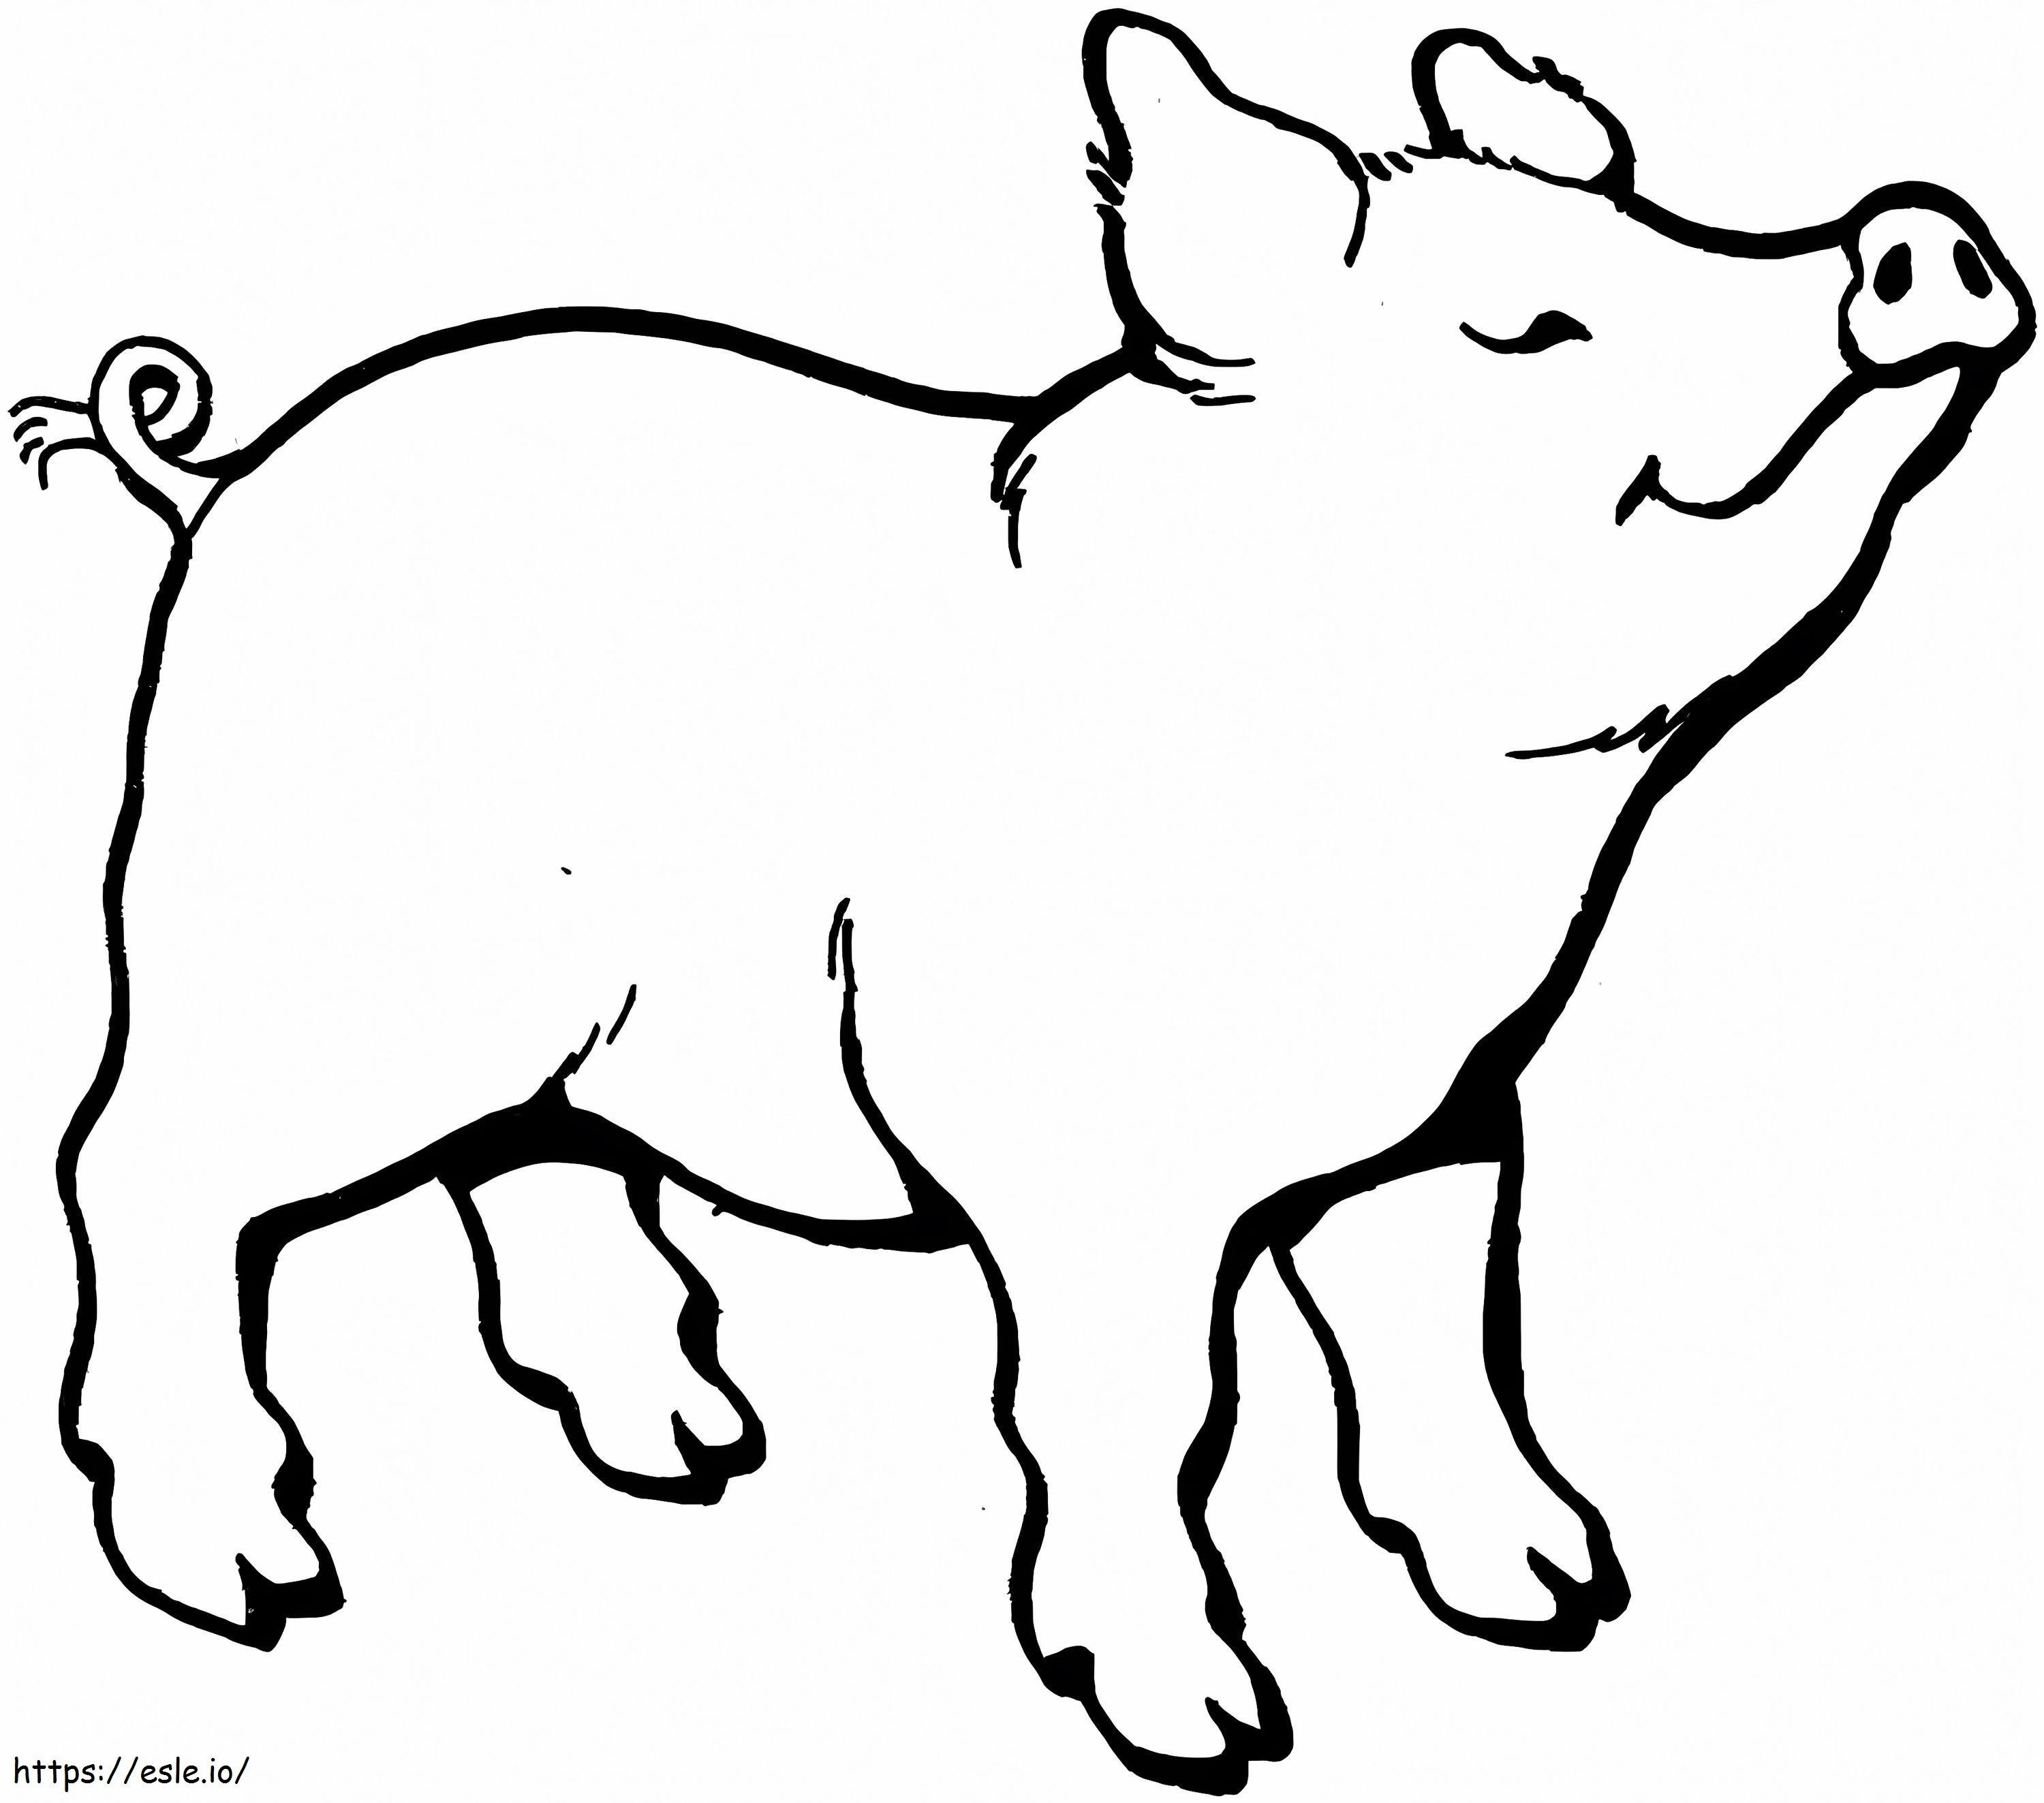 Pig Smells Something coloring page